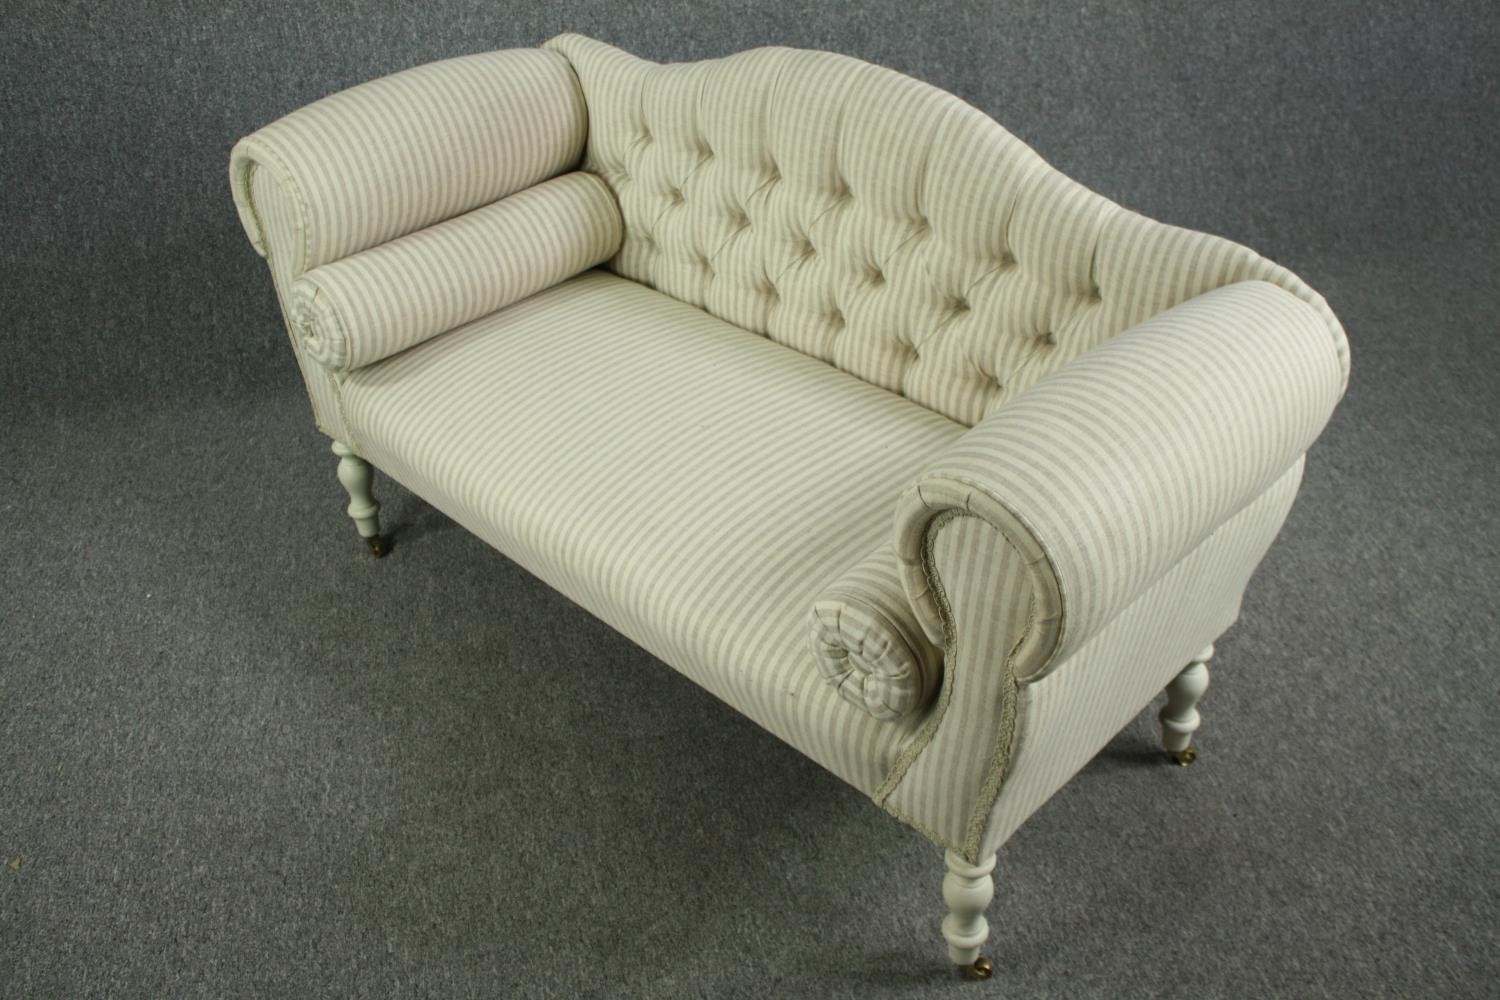 Small sofa or loveseat, Victorian style in deep buttoned upholstery. H.78 W.140 D.57cm. - Image 4 of 6